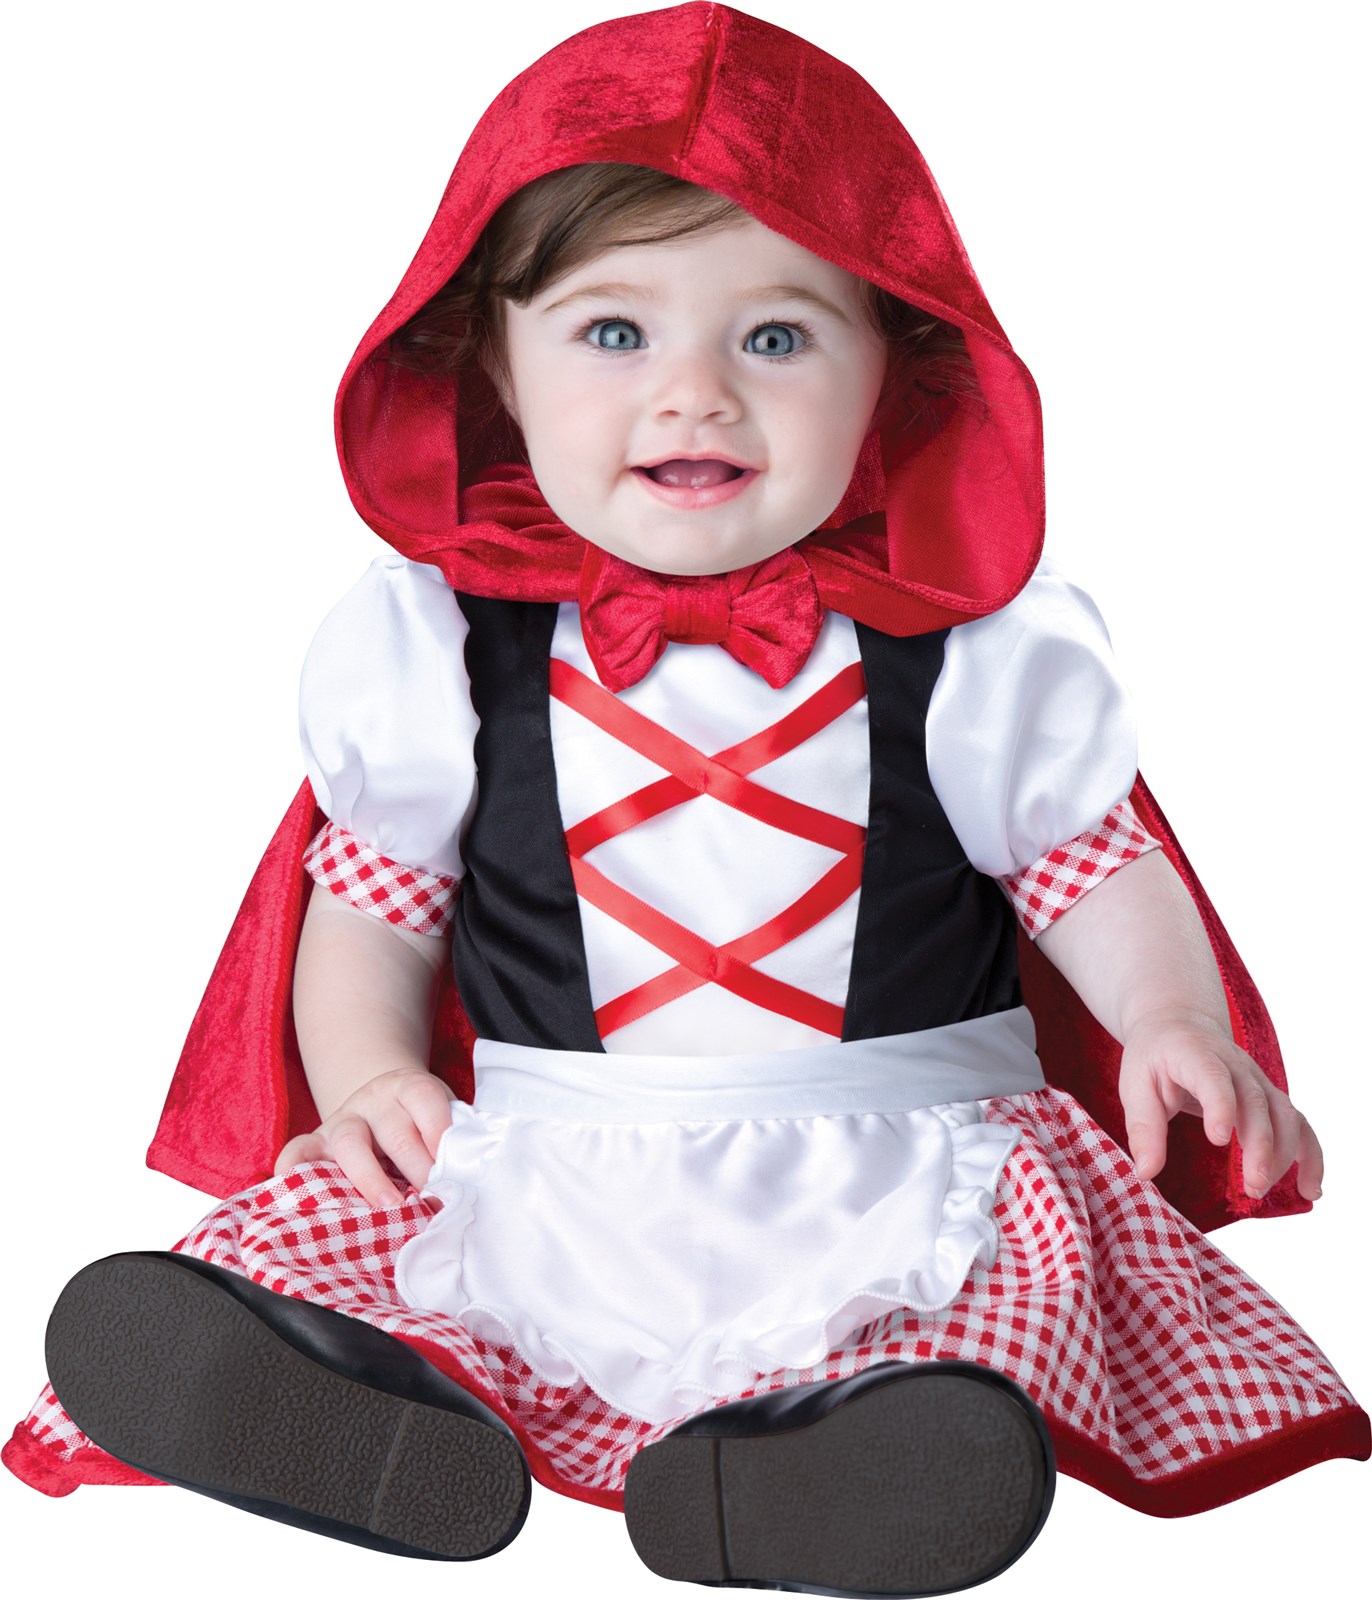 Little Red Riding Hood Costume For Toddlers